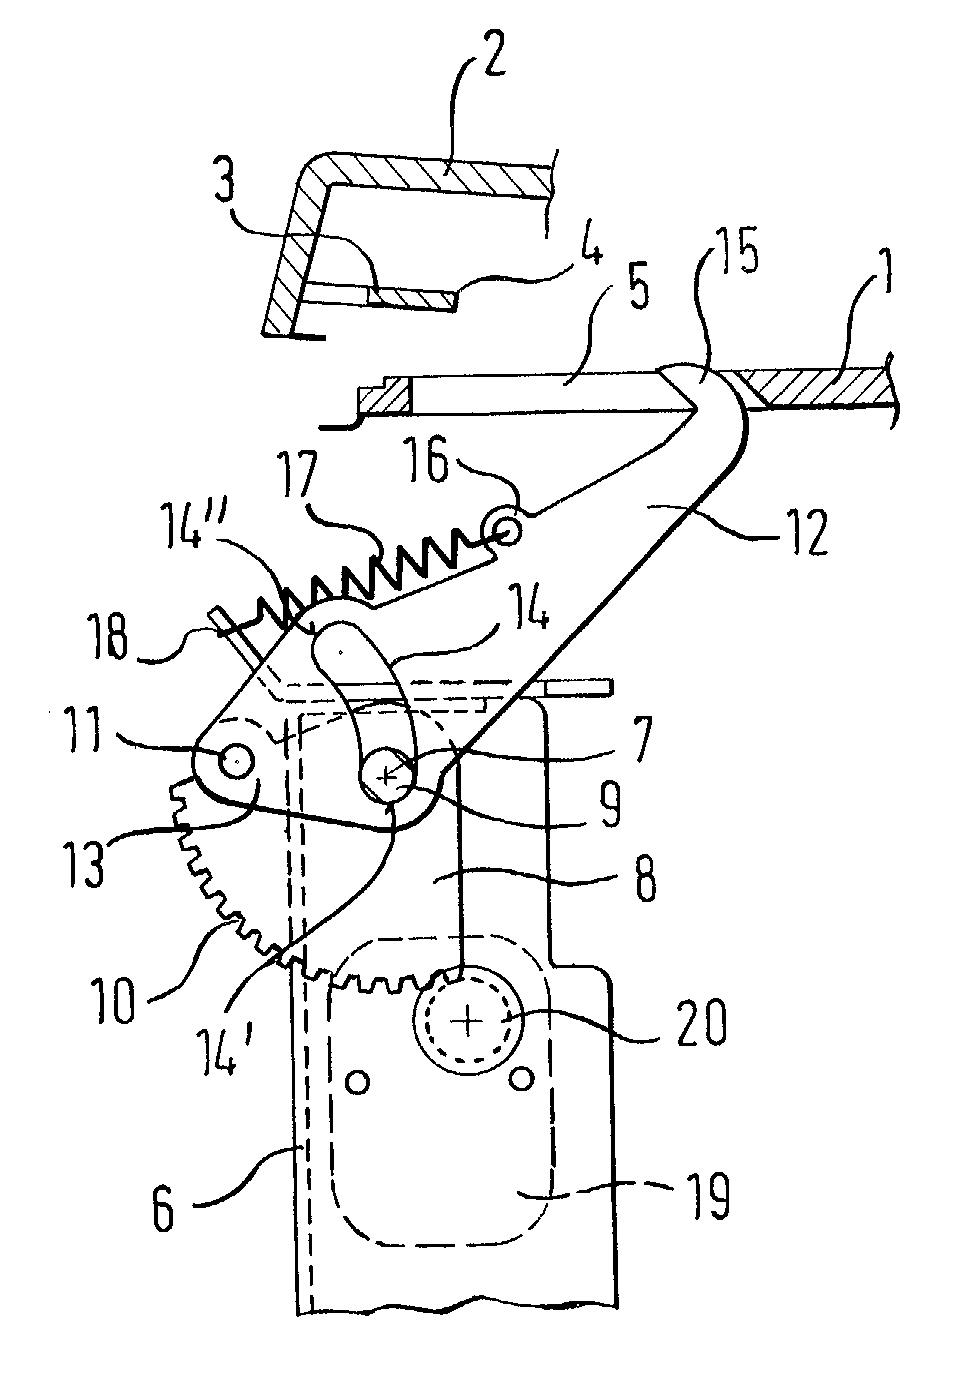 Locking device of a closure with a housing